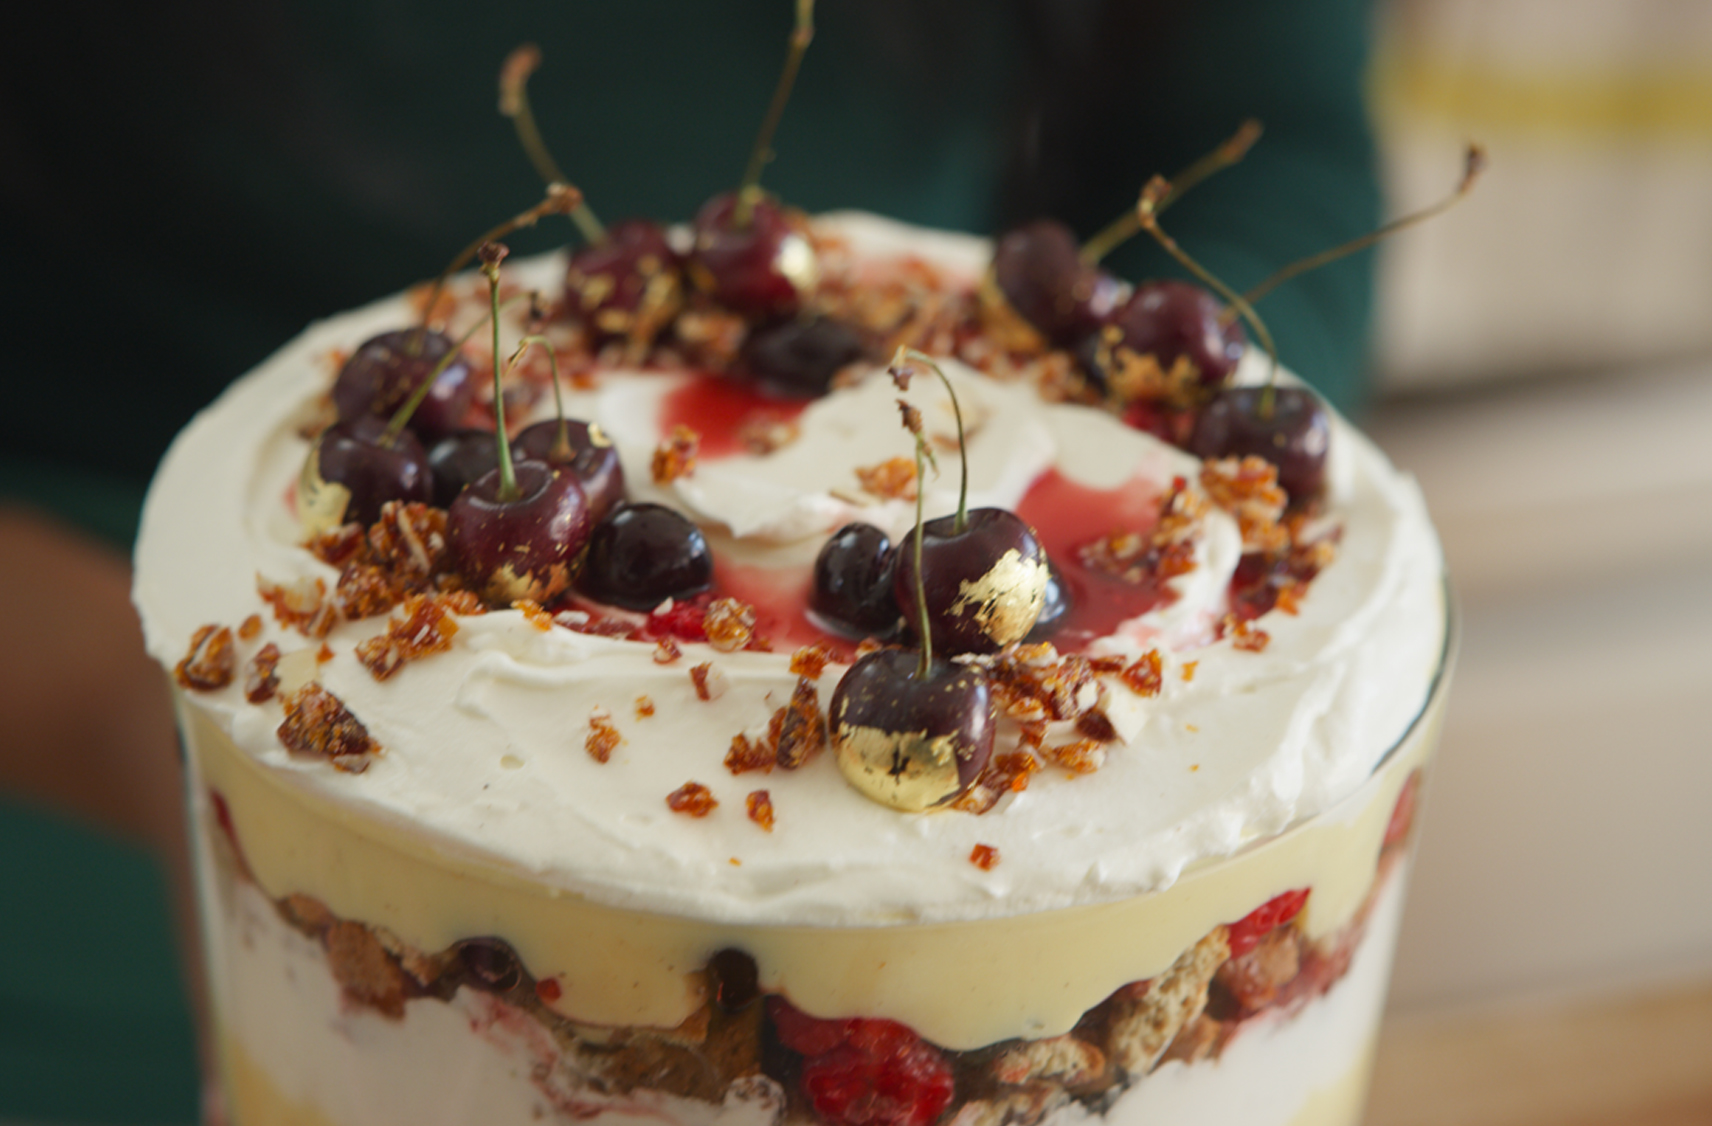 A Cherry Almond Trifle in a glass bowl with layers of whipped cream, berries and custard topped with almond pieces and cherries .